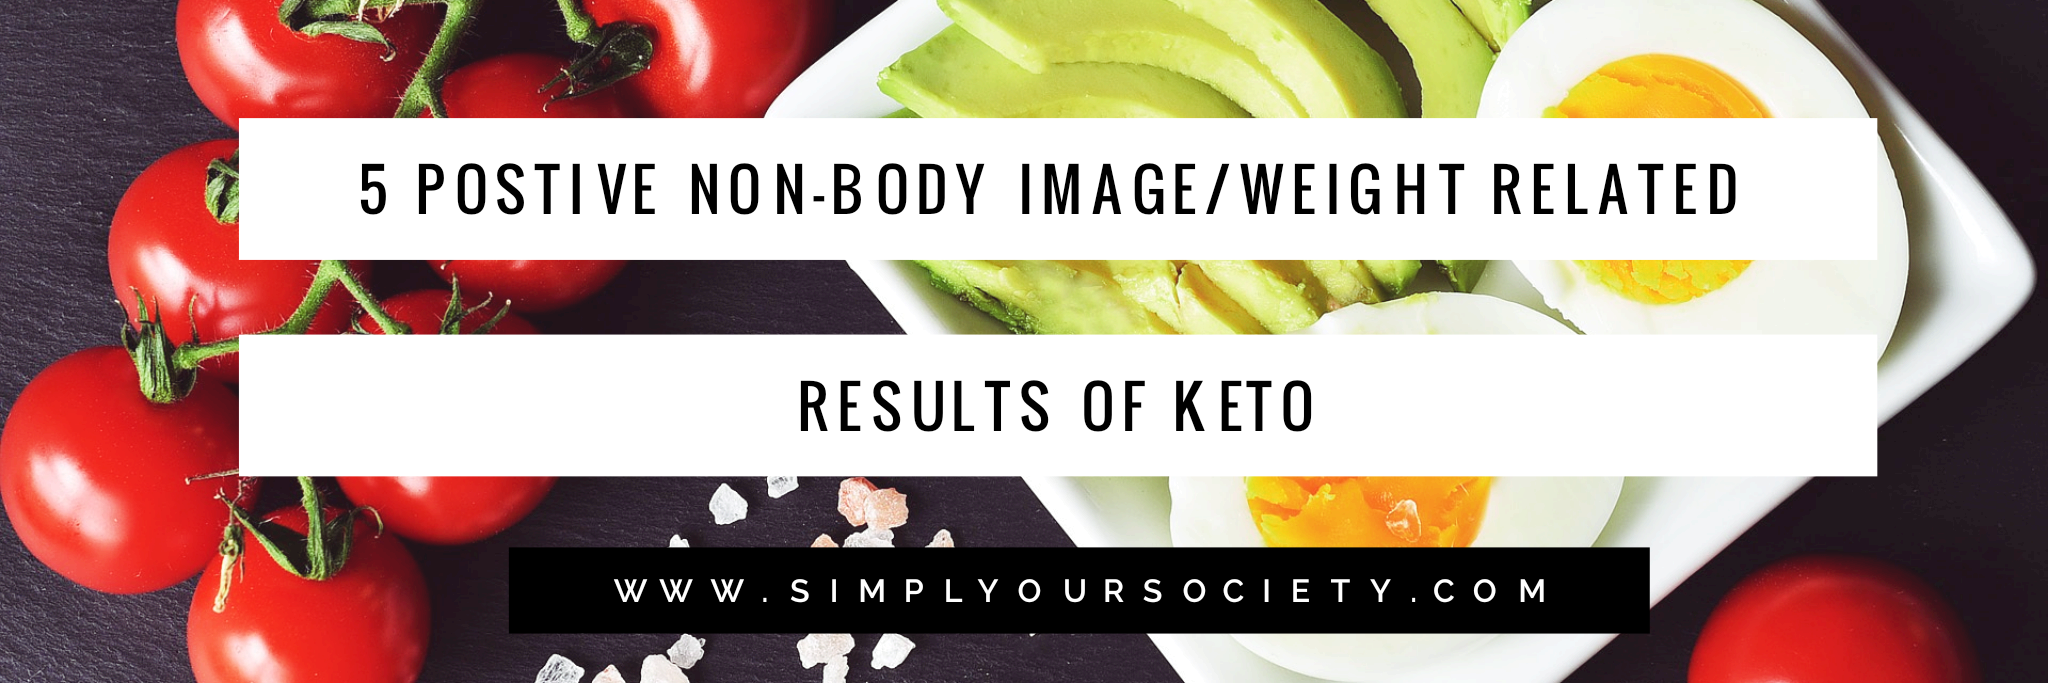 keto diet review, keto diet, low carbohydrate diet, ketosis, surprising benefits of keto diet, keto diet benefits and ristks